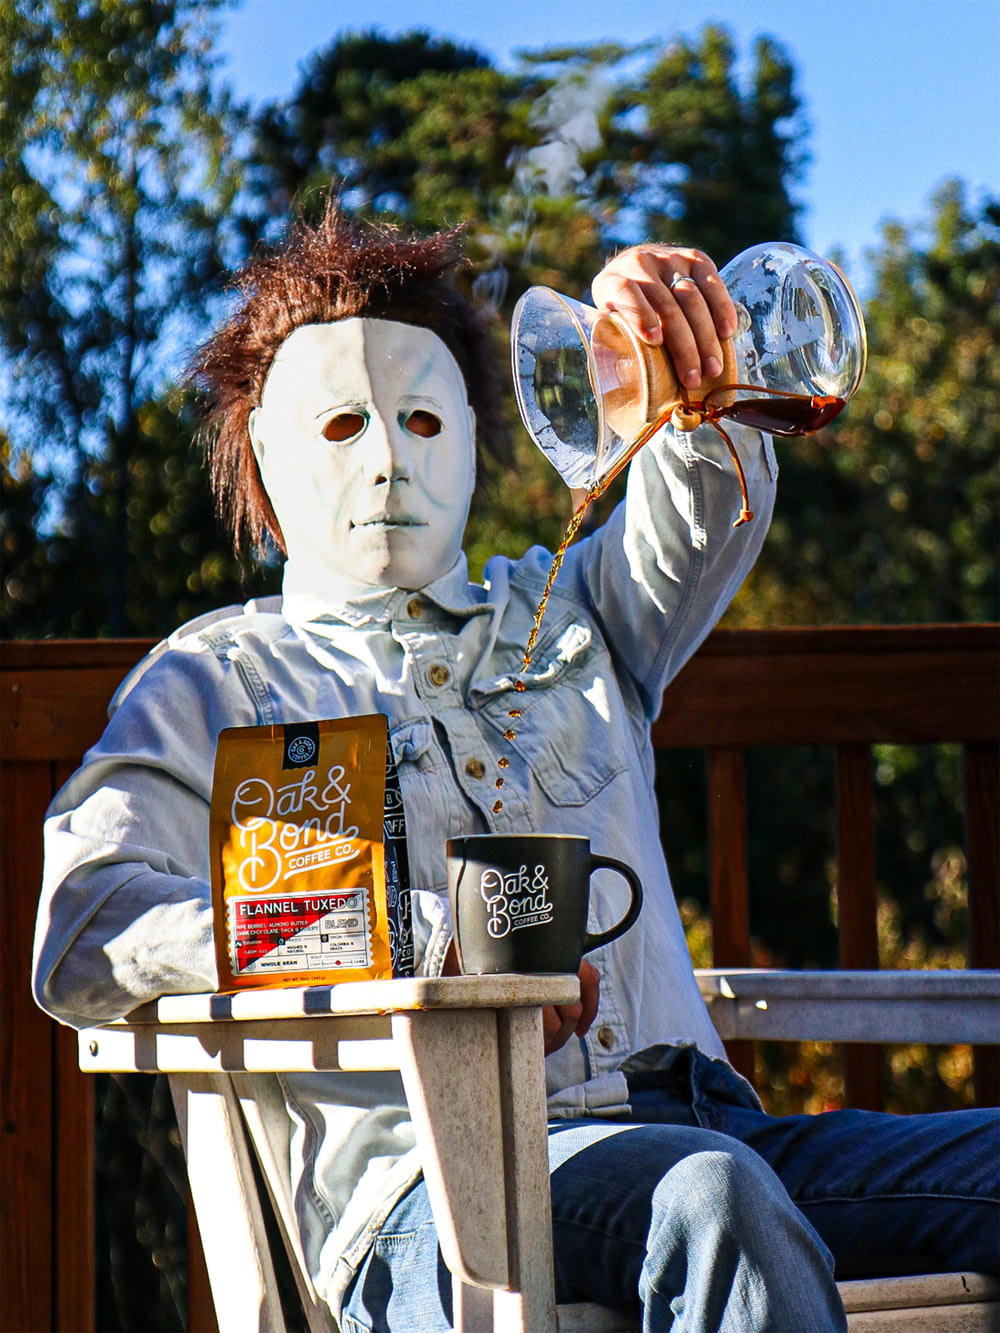 a person wearing a mask drinking from a glass